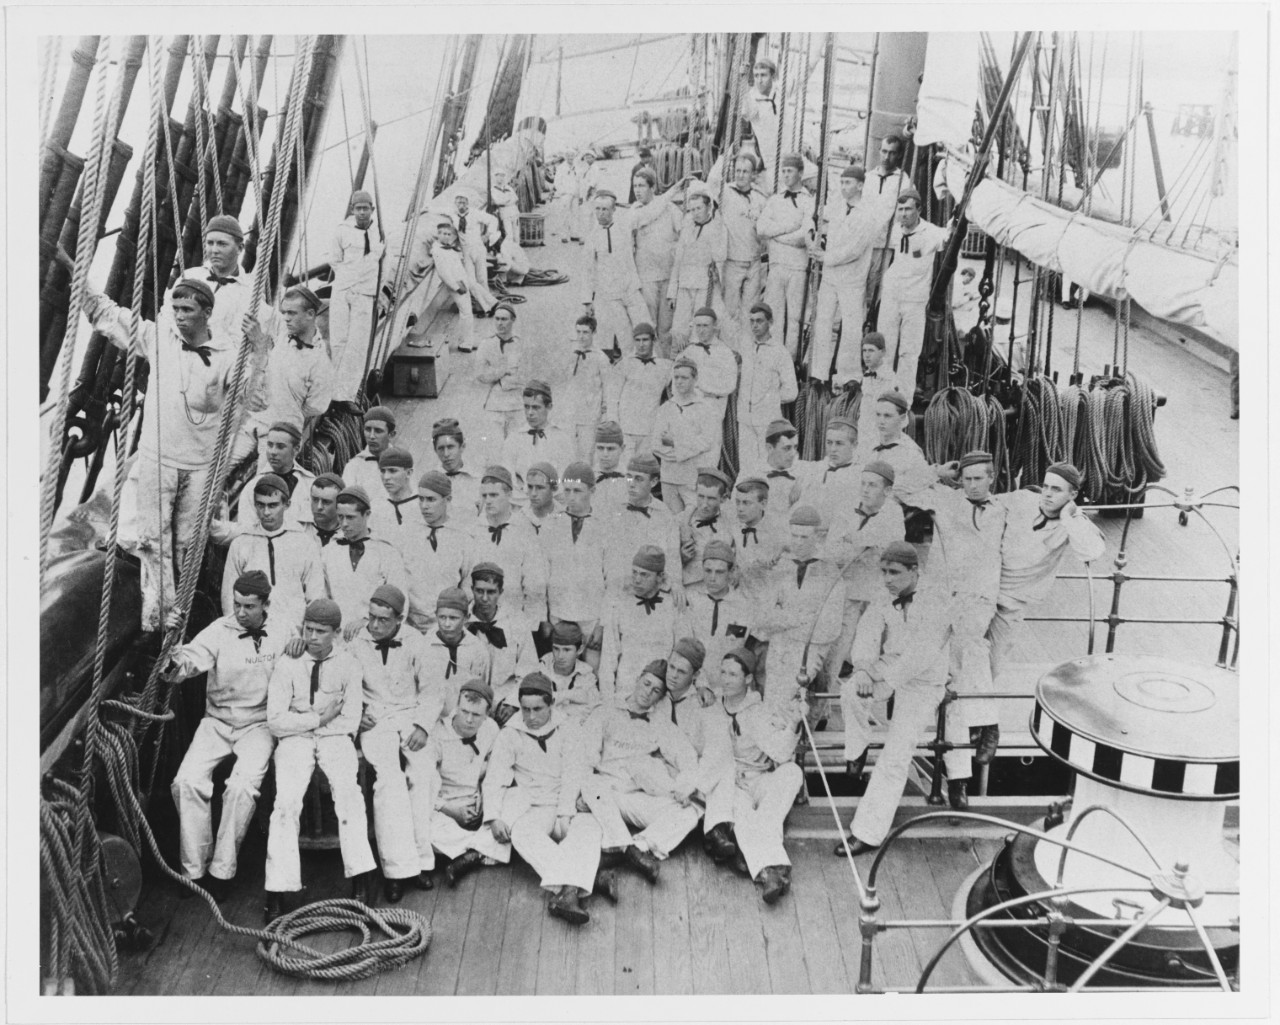 USS CONSTELLATION (1855-1955), members of the U.S. Naval Academy Class of 1889.